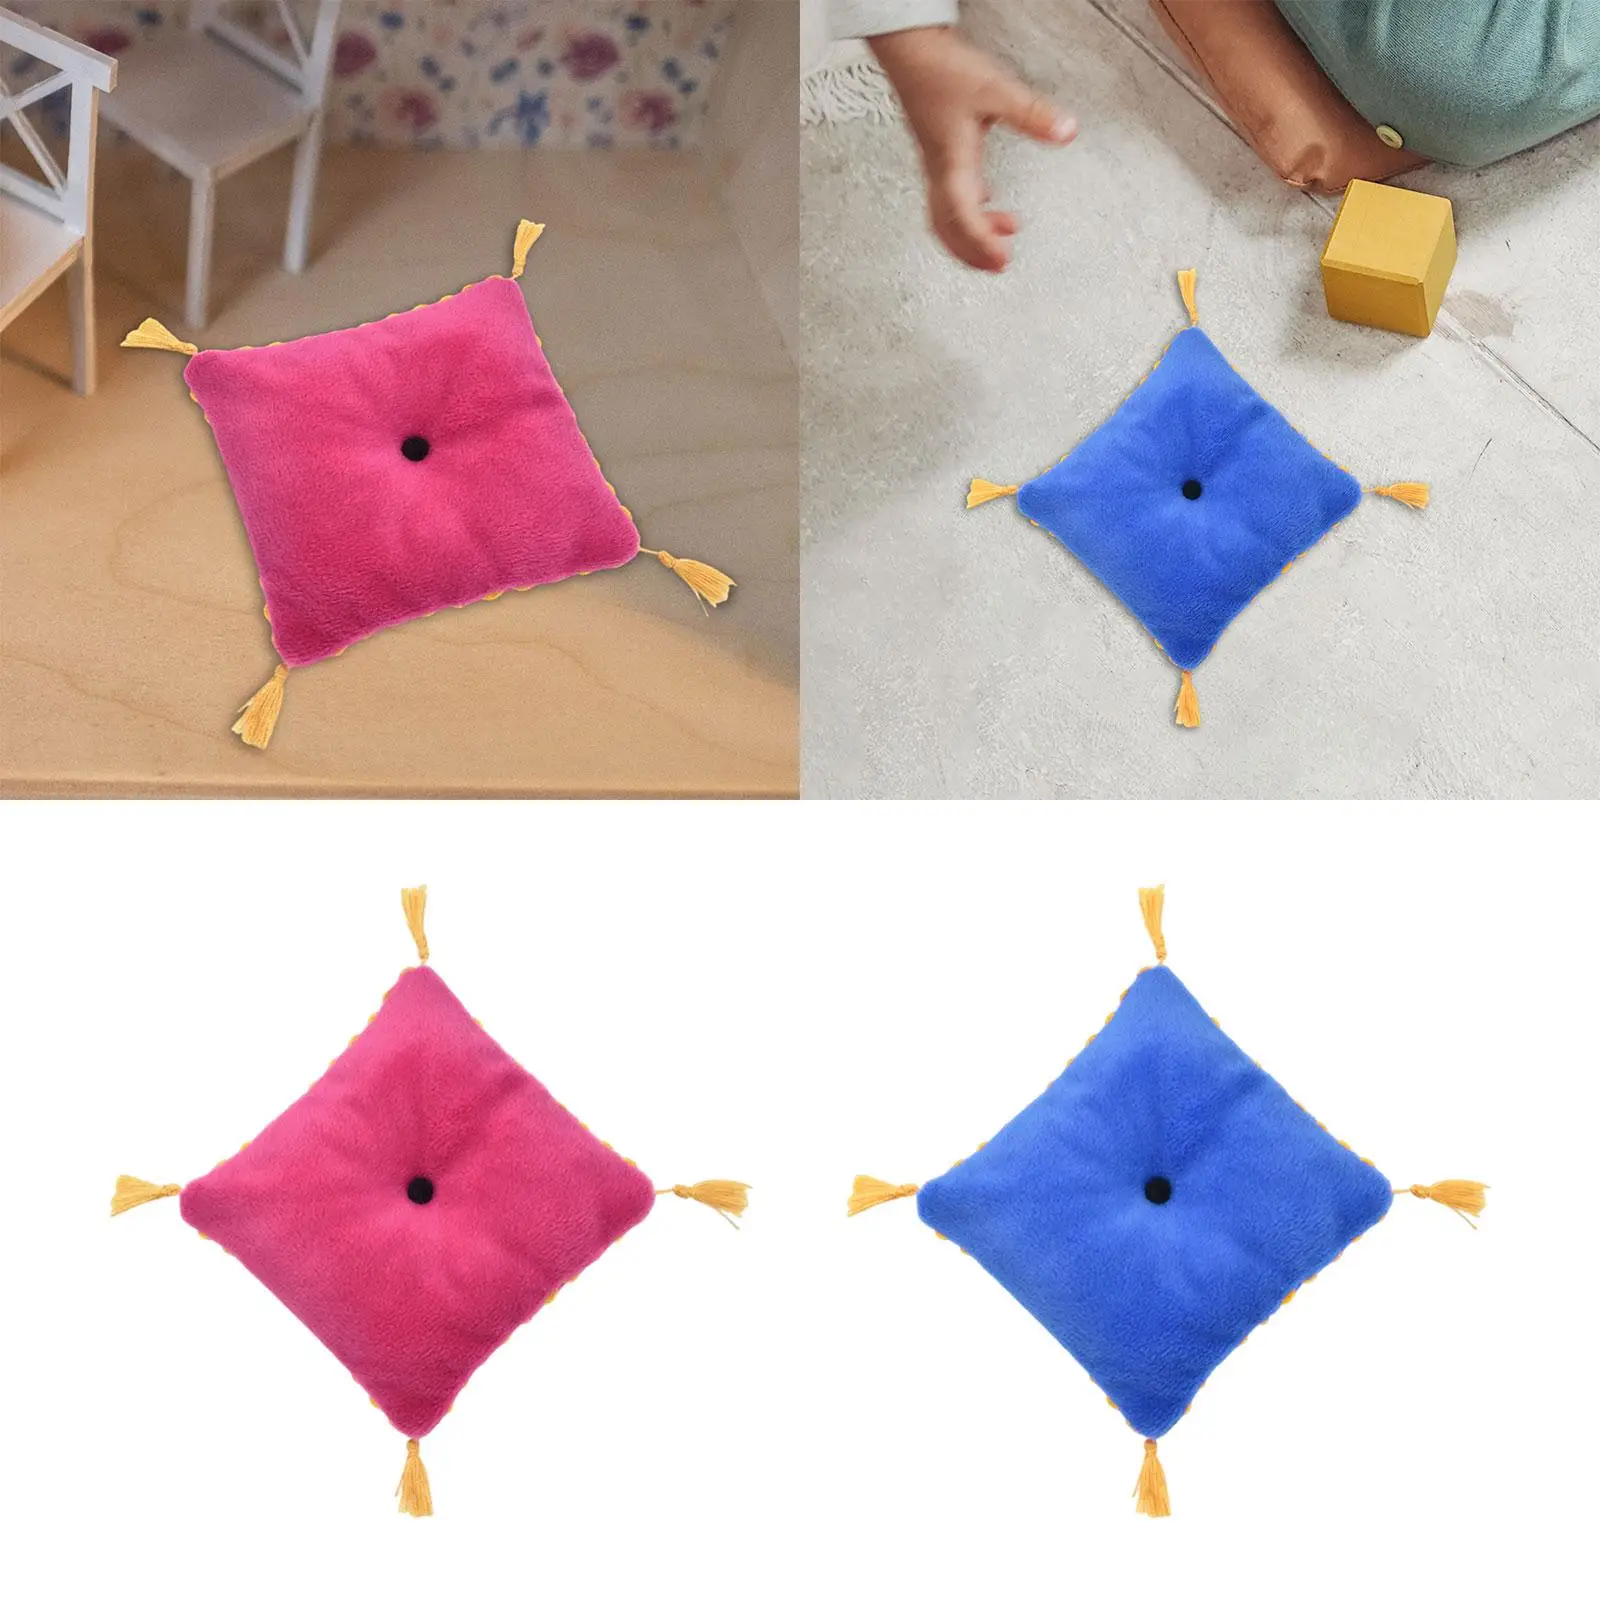 Simulation 1/6 Dollhouse Pillow Decor Micro Landscape Ornament Miniature Furniture Accessory for Kids Girls Boys Gifts